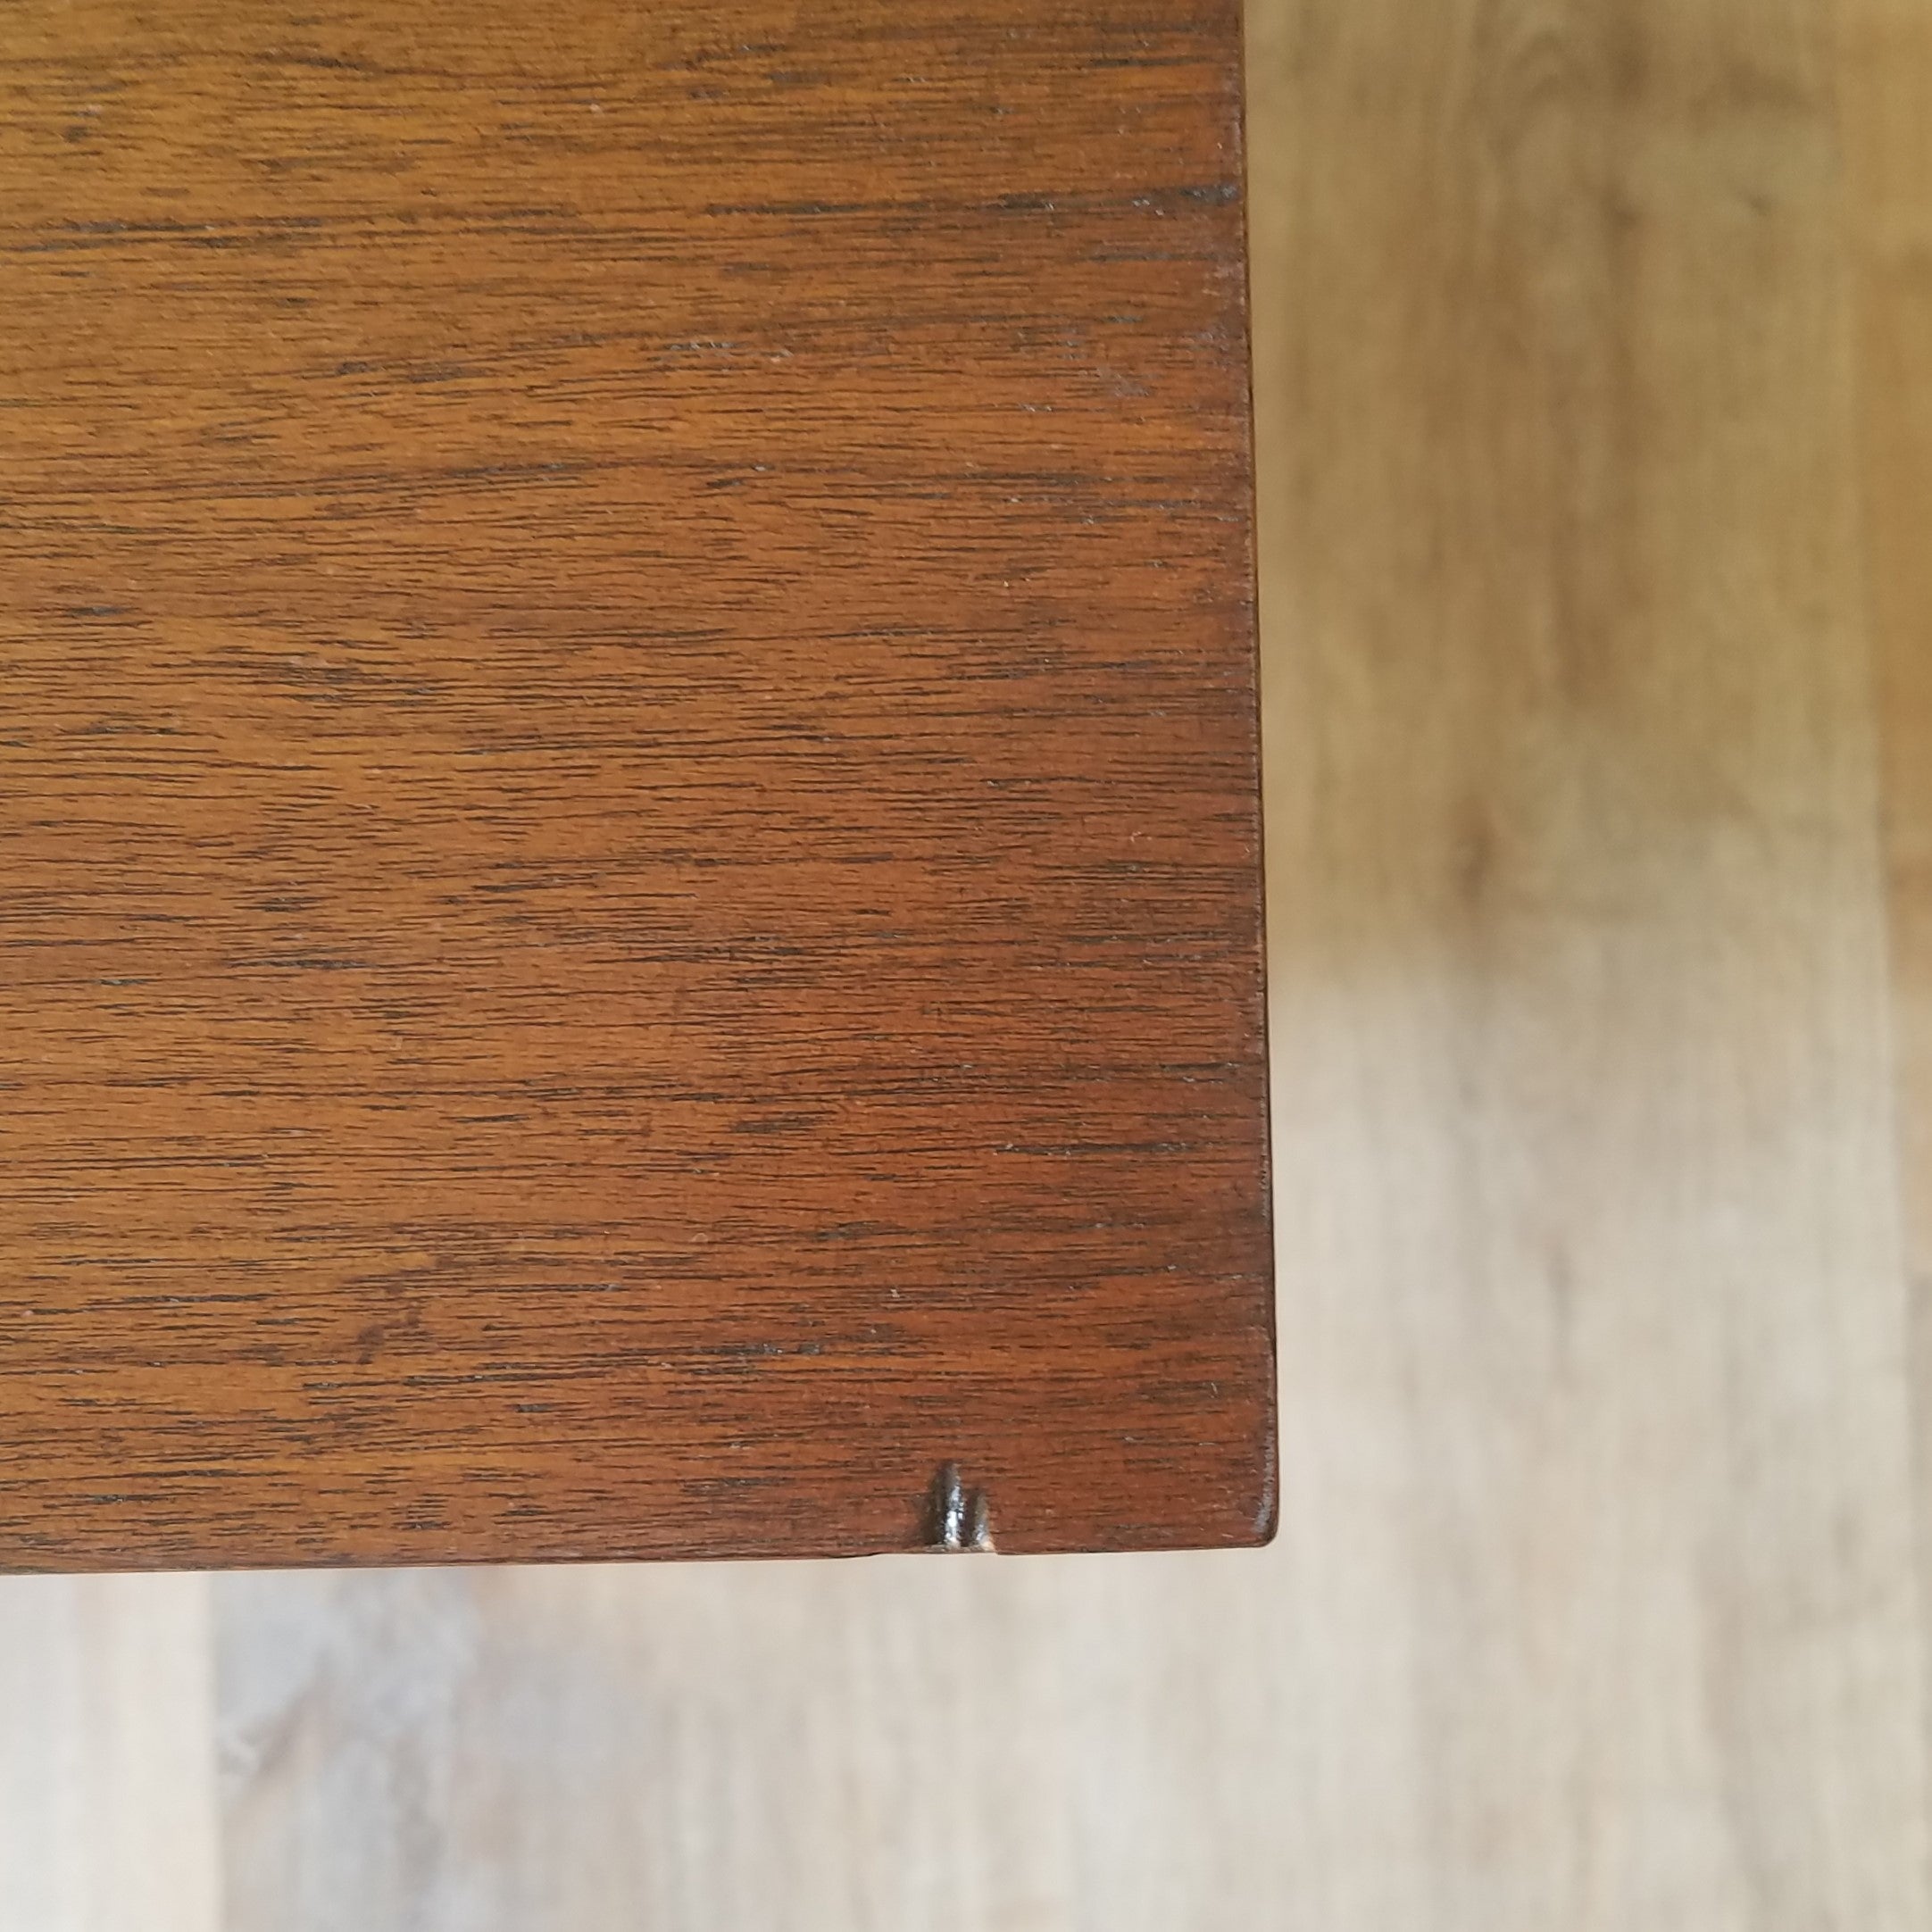 Detail view of 1960s Mid-Century Modern Brasilia End Table by Broyhill in Seattle, WA.